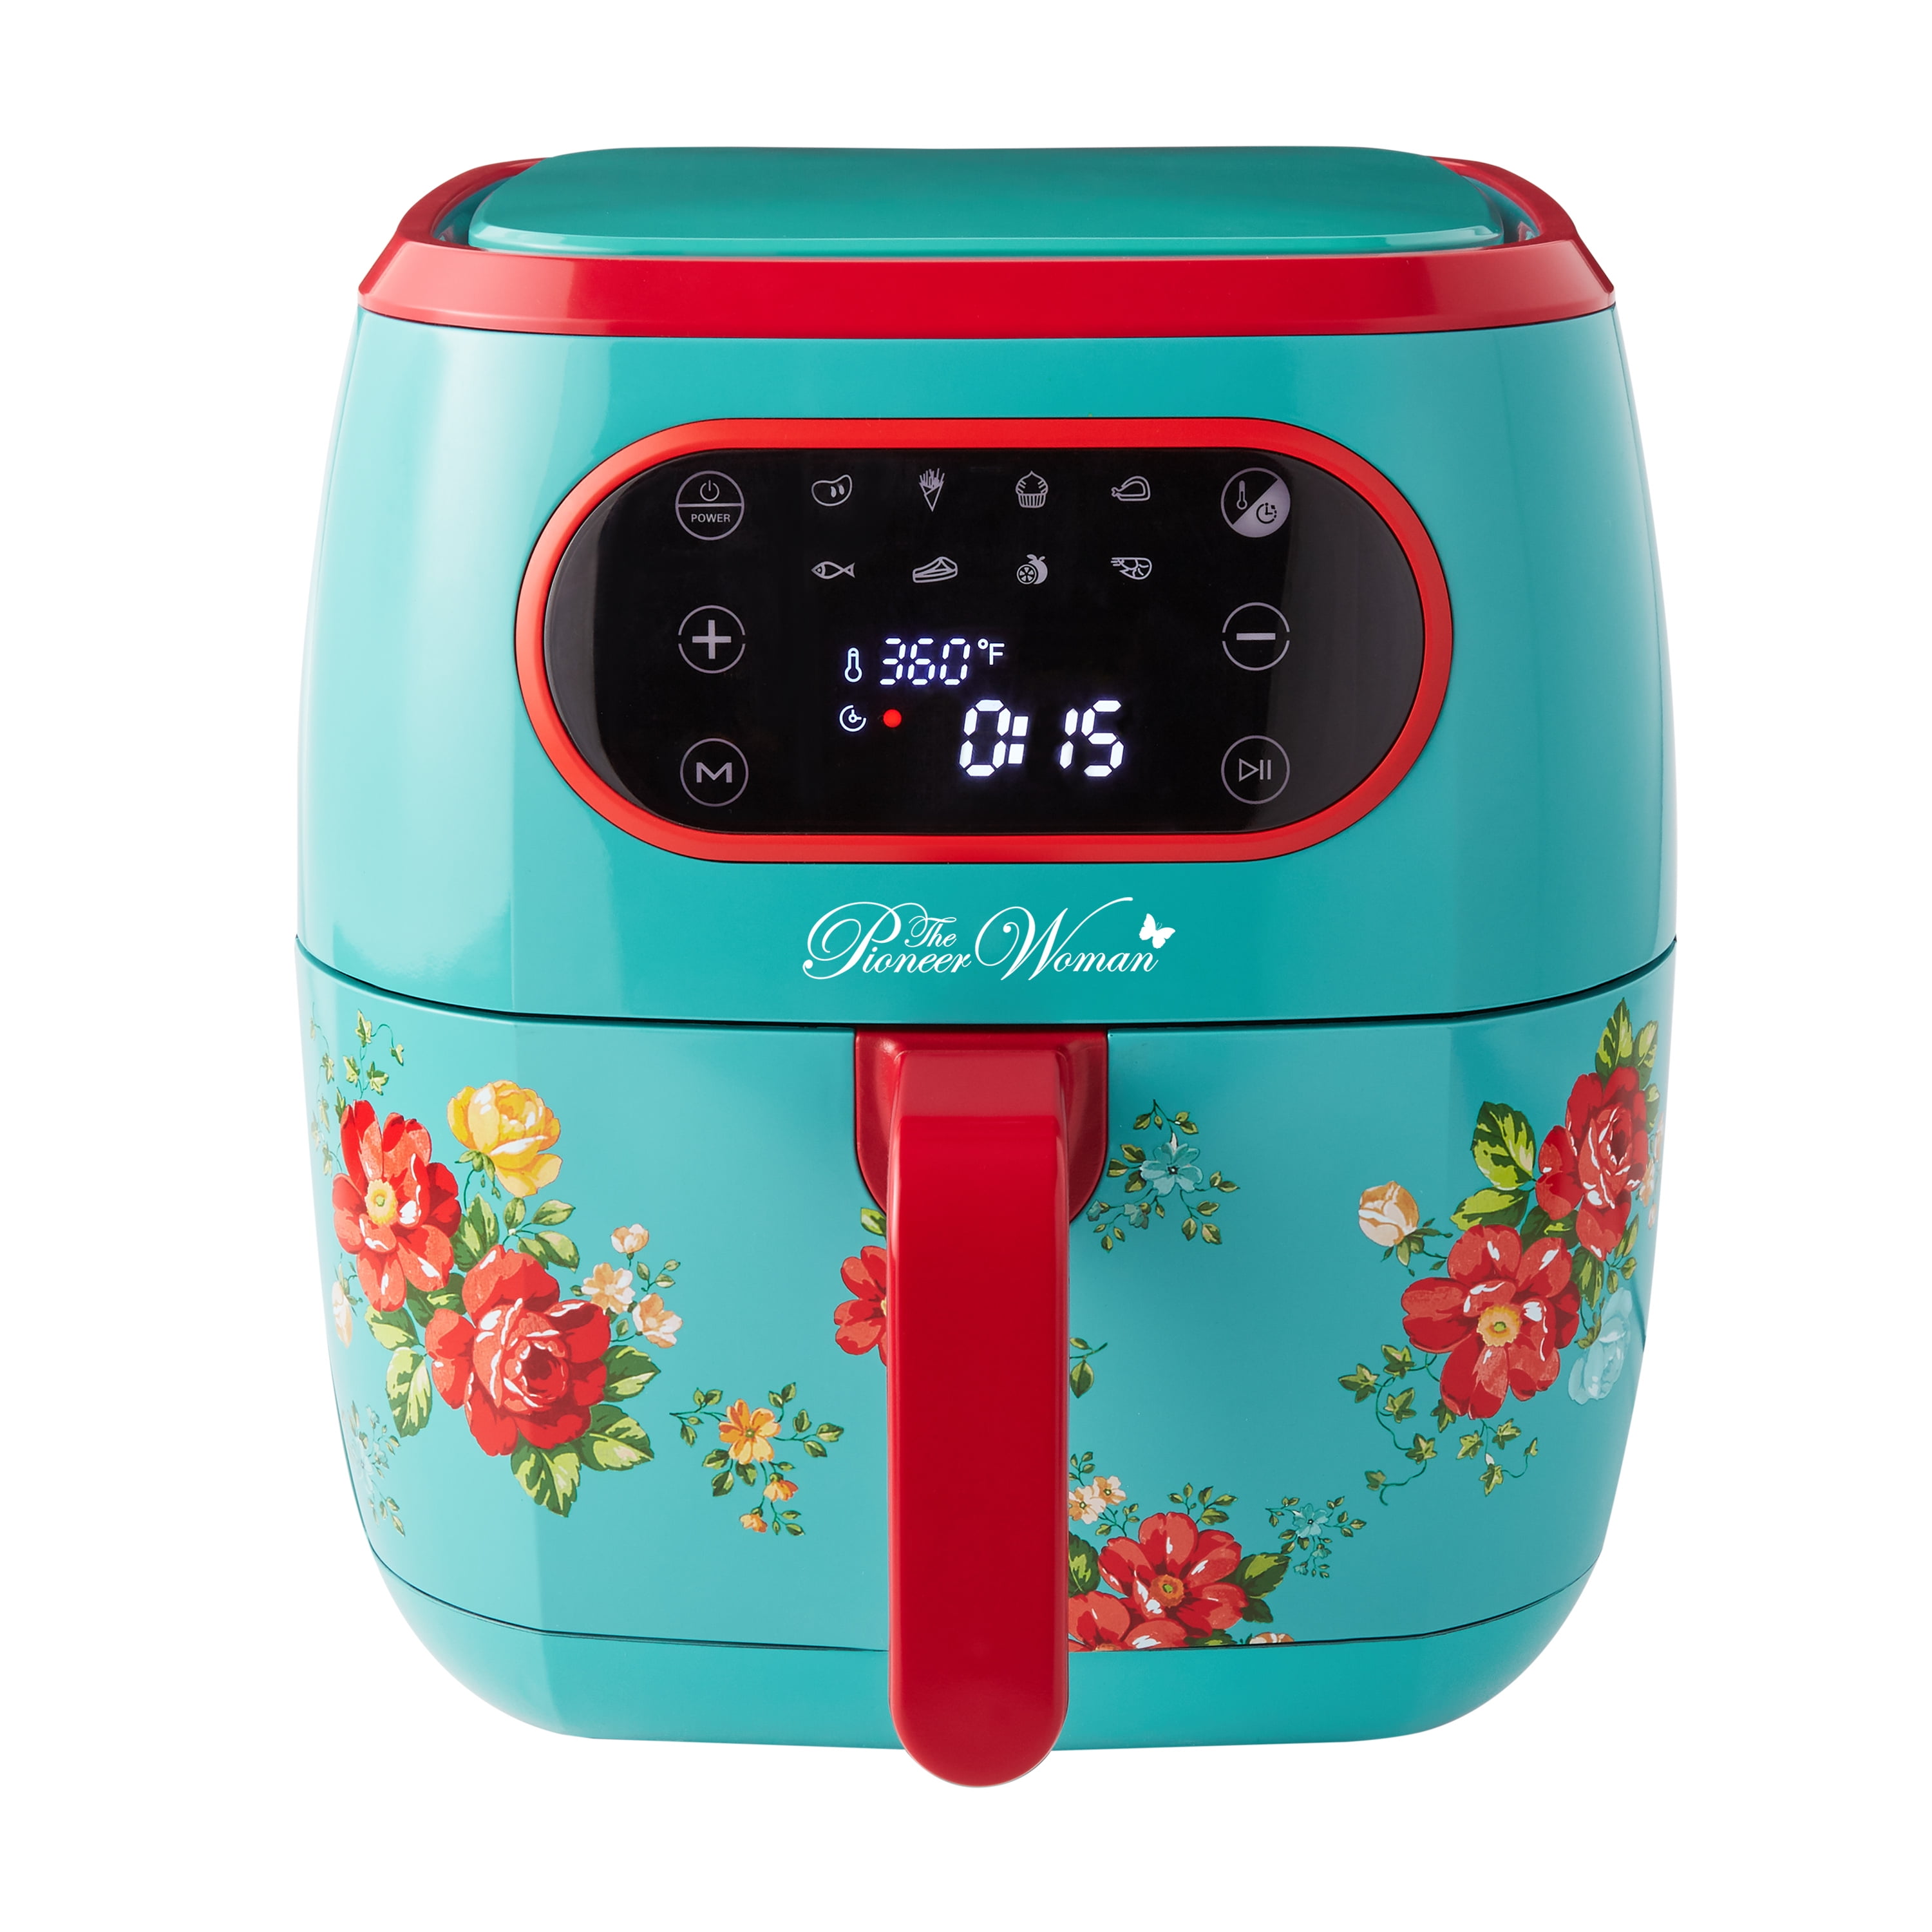 The Pioneer Woman Vintage Floral 6.3 Quart Air Fryer with LED Screen, 13.46″